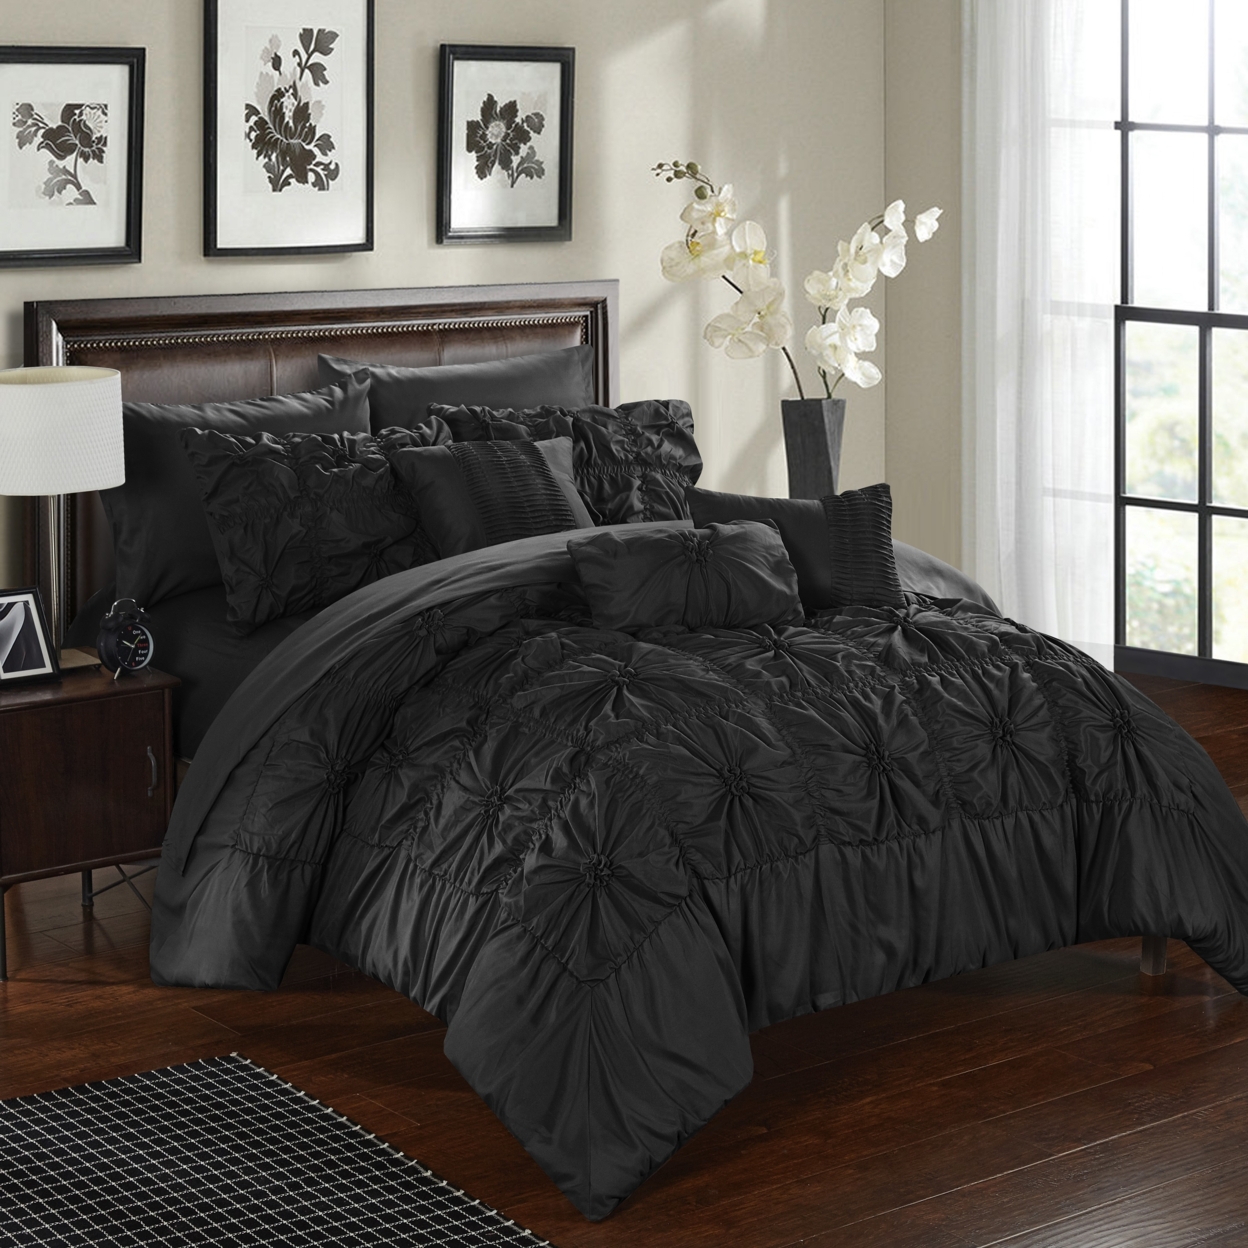 Chic Home 8/10 Piece Sheffield Floral Pinch Pleat Ruffled Designer Embellished Bed In A Bag Comforter Set With Sheet Set - Brick, Twin